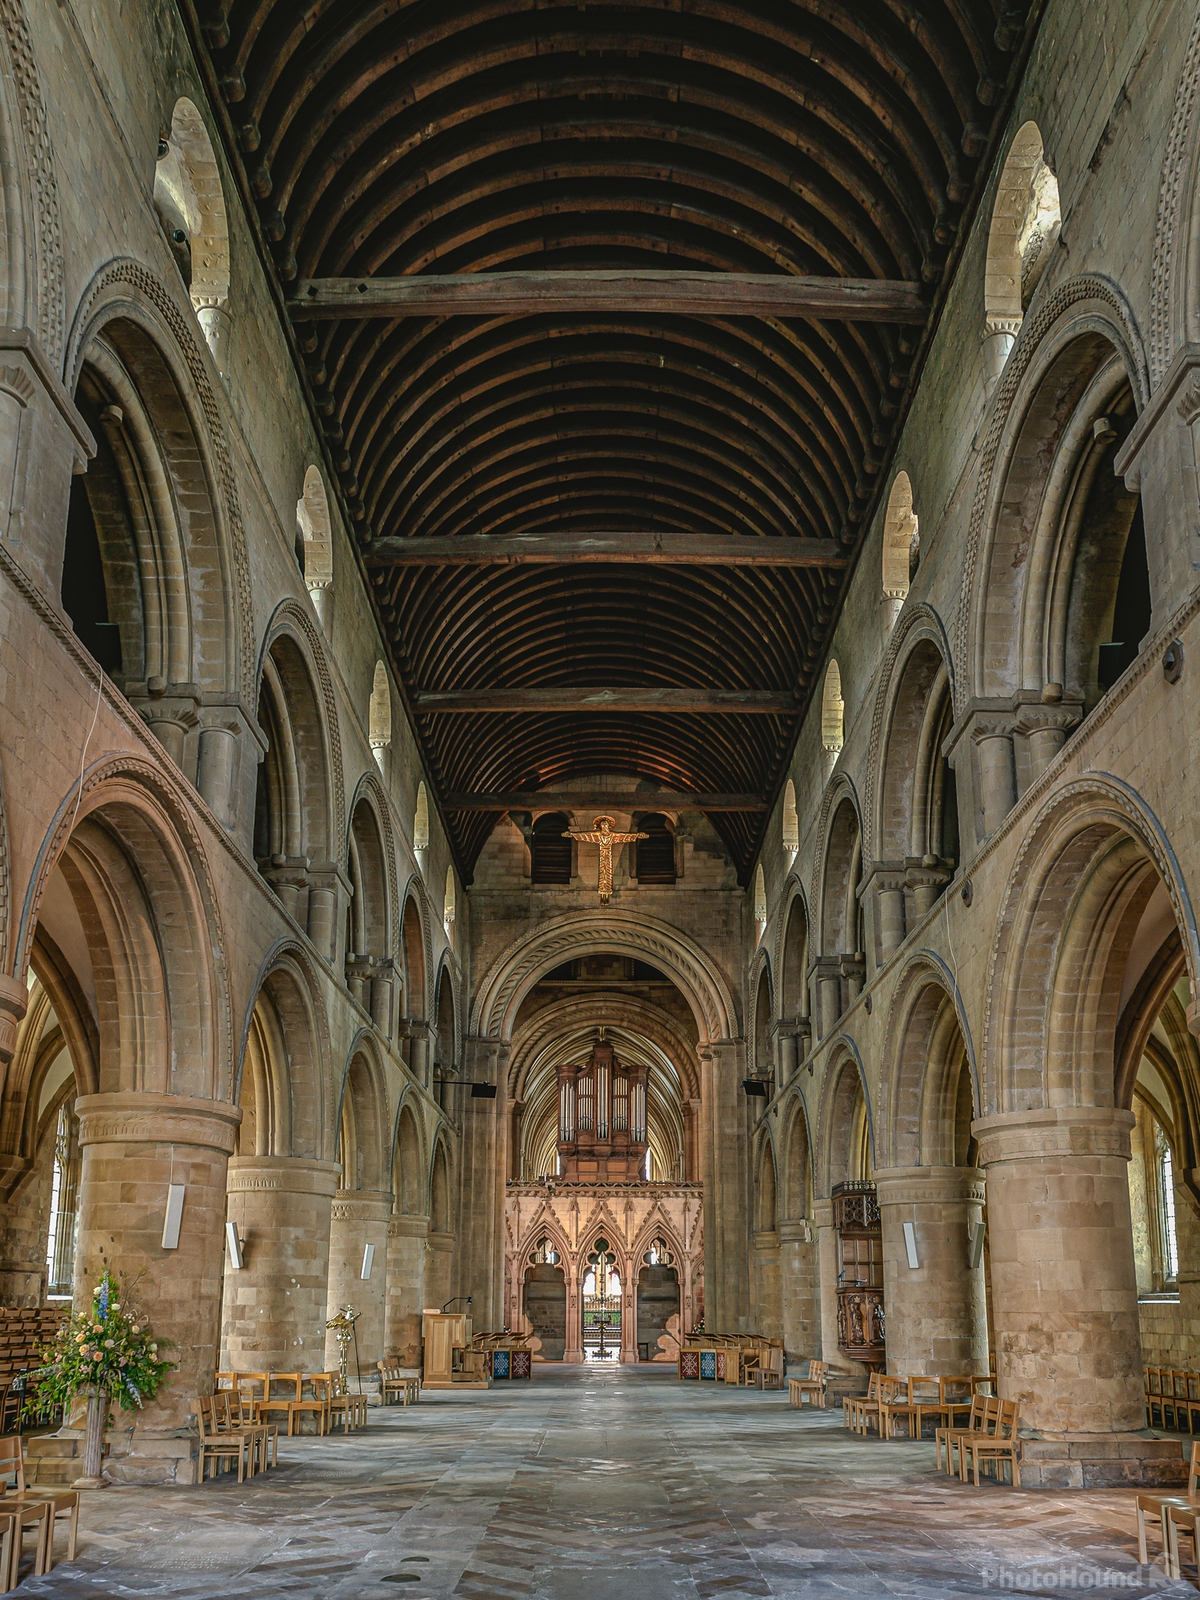 Image of Southwell Minster by James Billings.